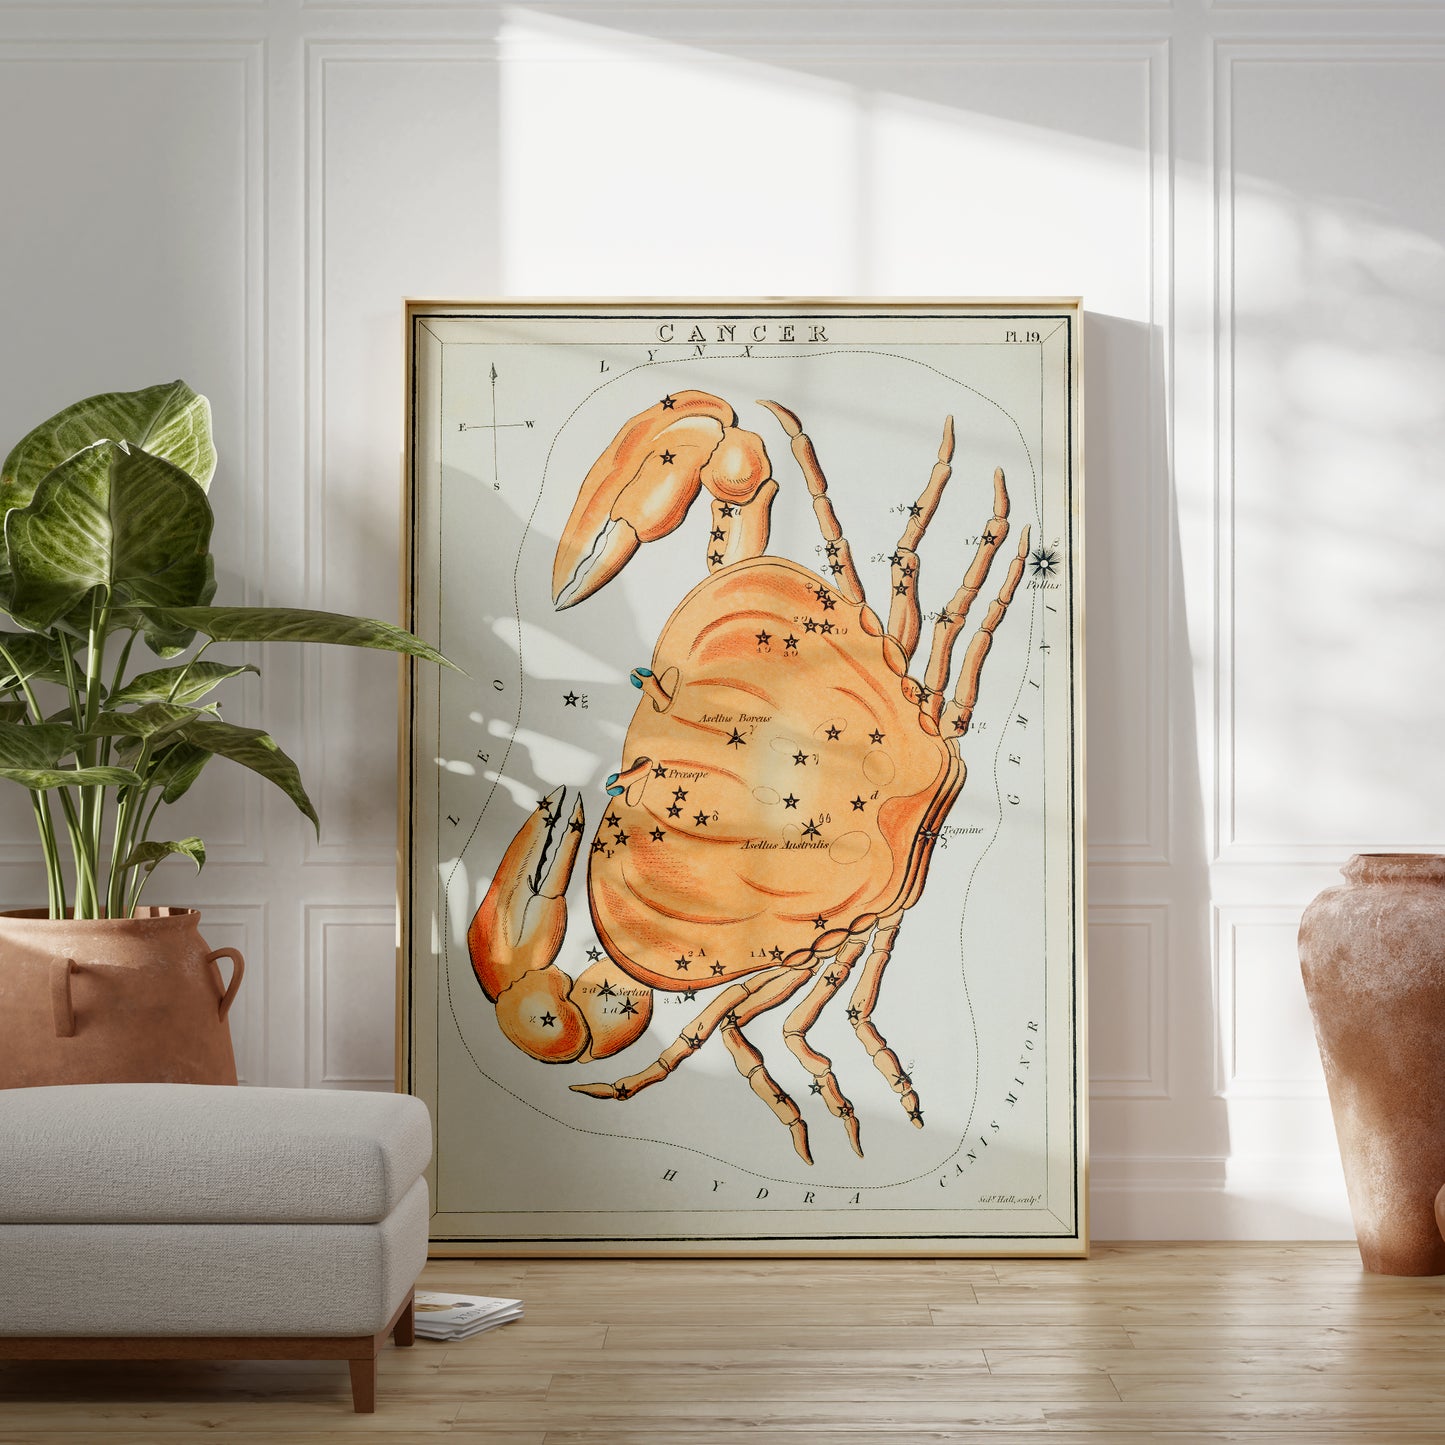 Vintage Cancer Constellation Wall Poster Print